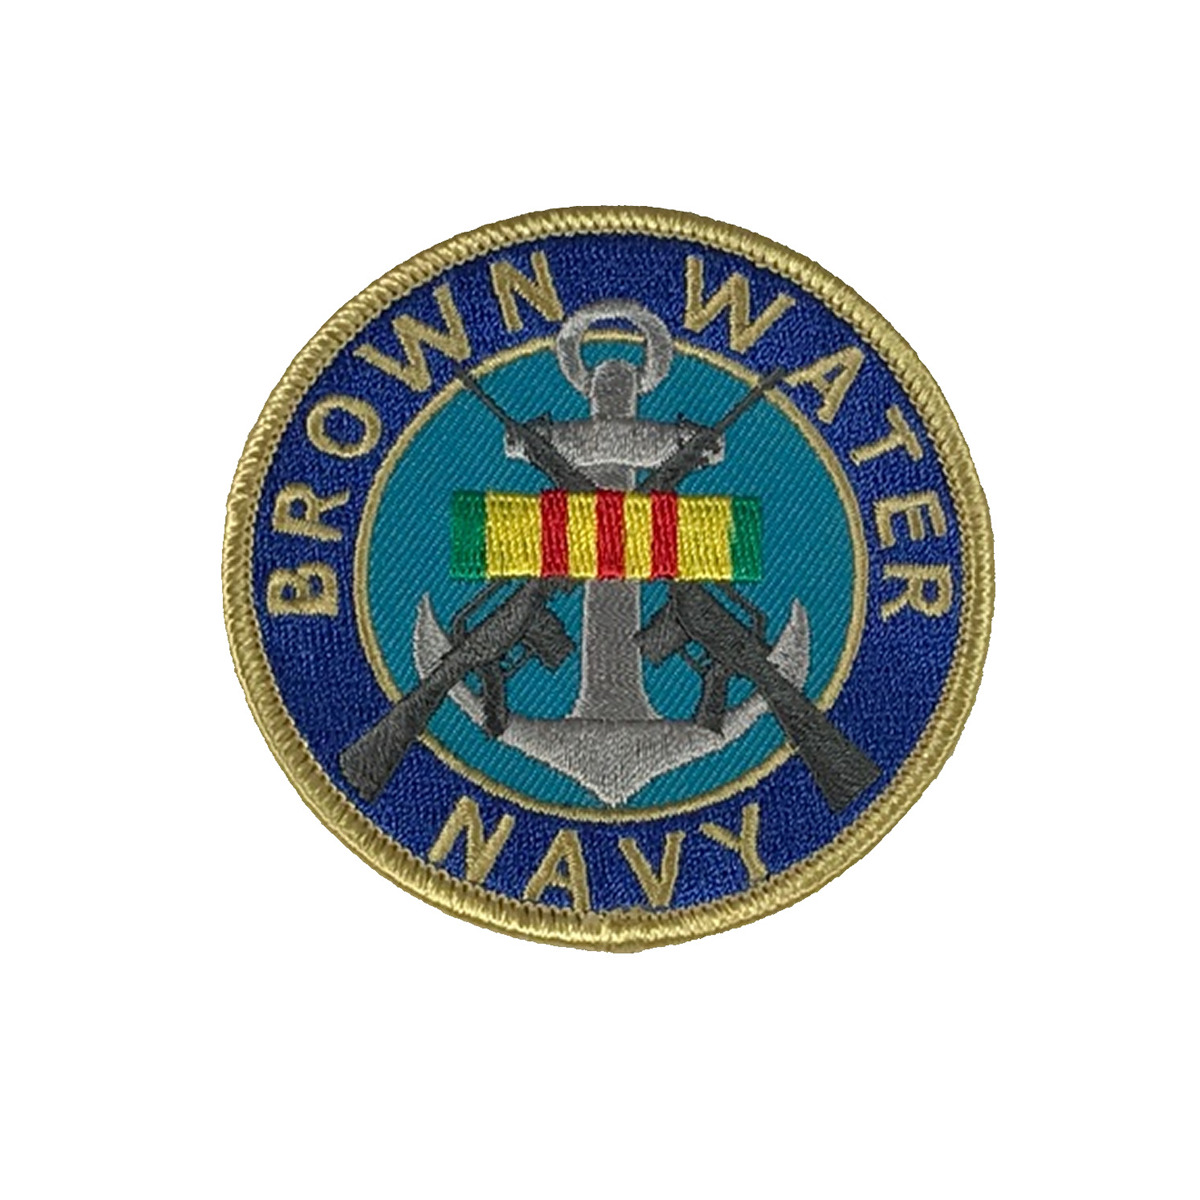 BROWN WATER NAVY W/ VIETNAM RIBBON PATCH - COLOR - Veteran Owned Business